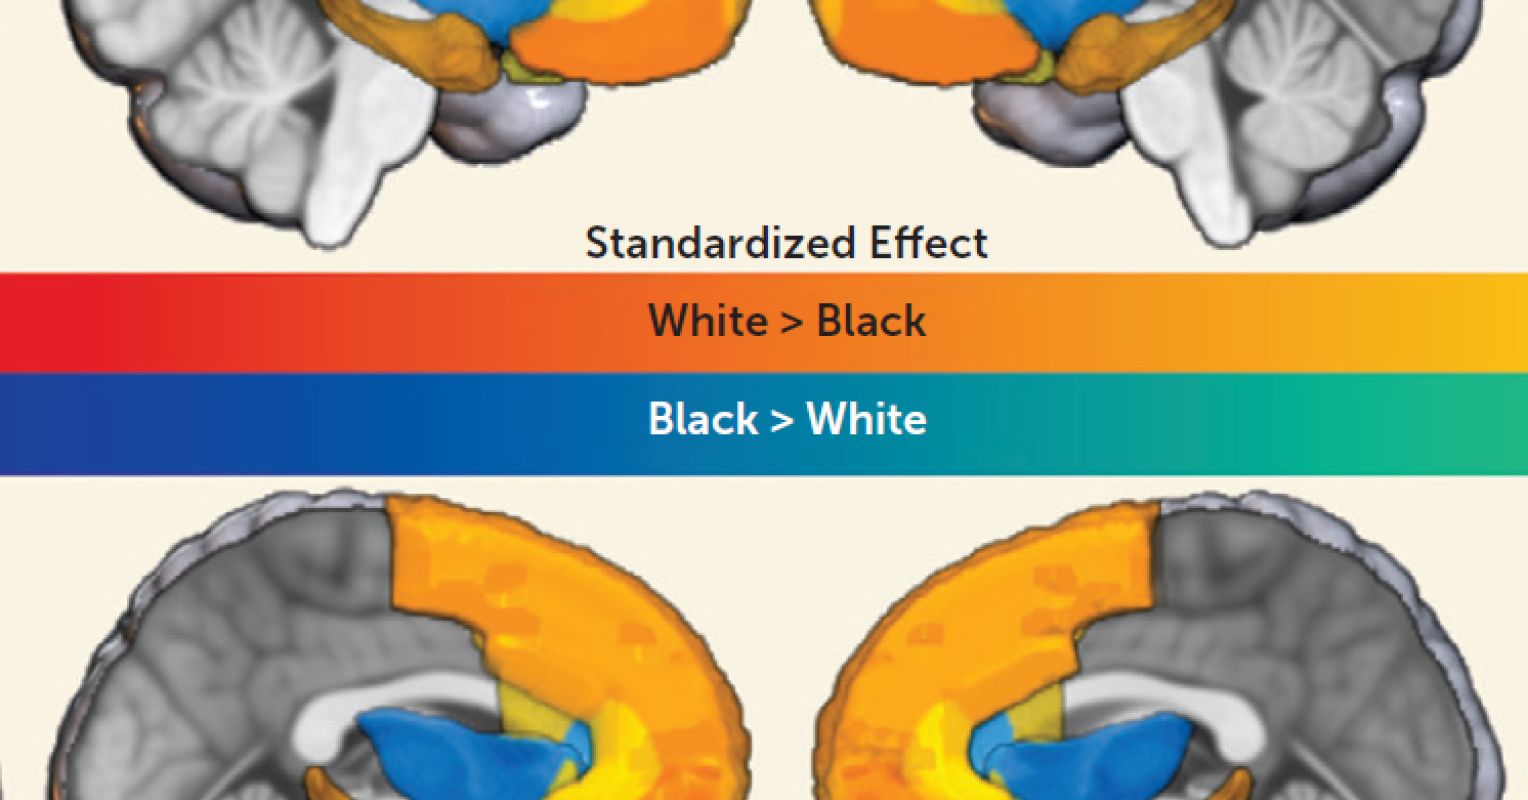 The Impact of Racism on the Developing Brain